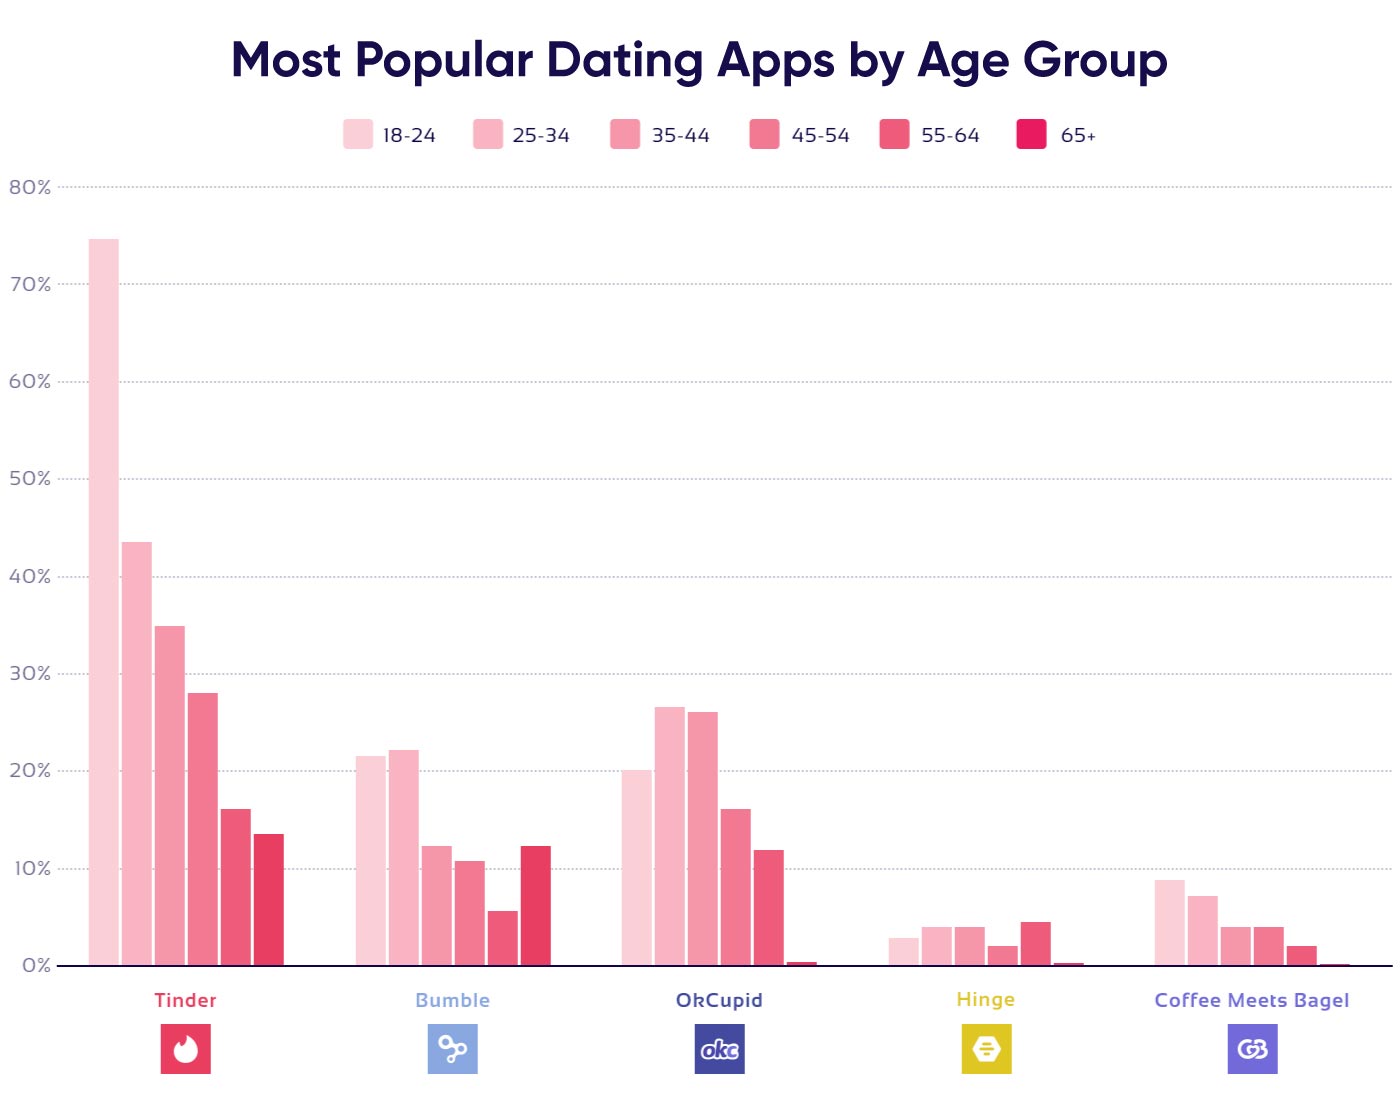 what age group use dating apps the most